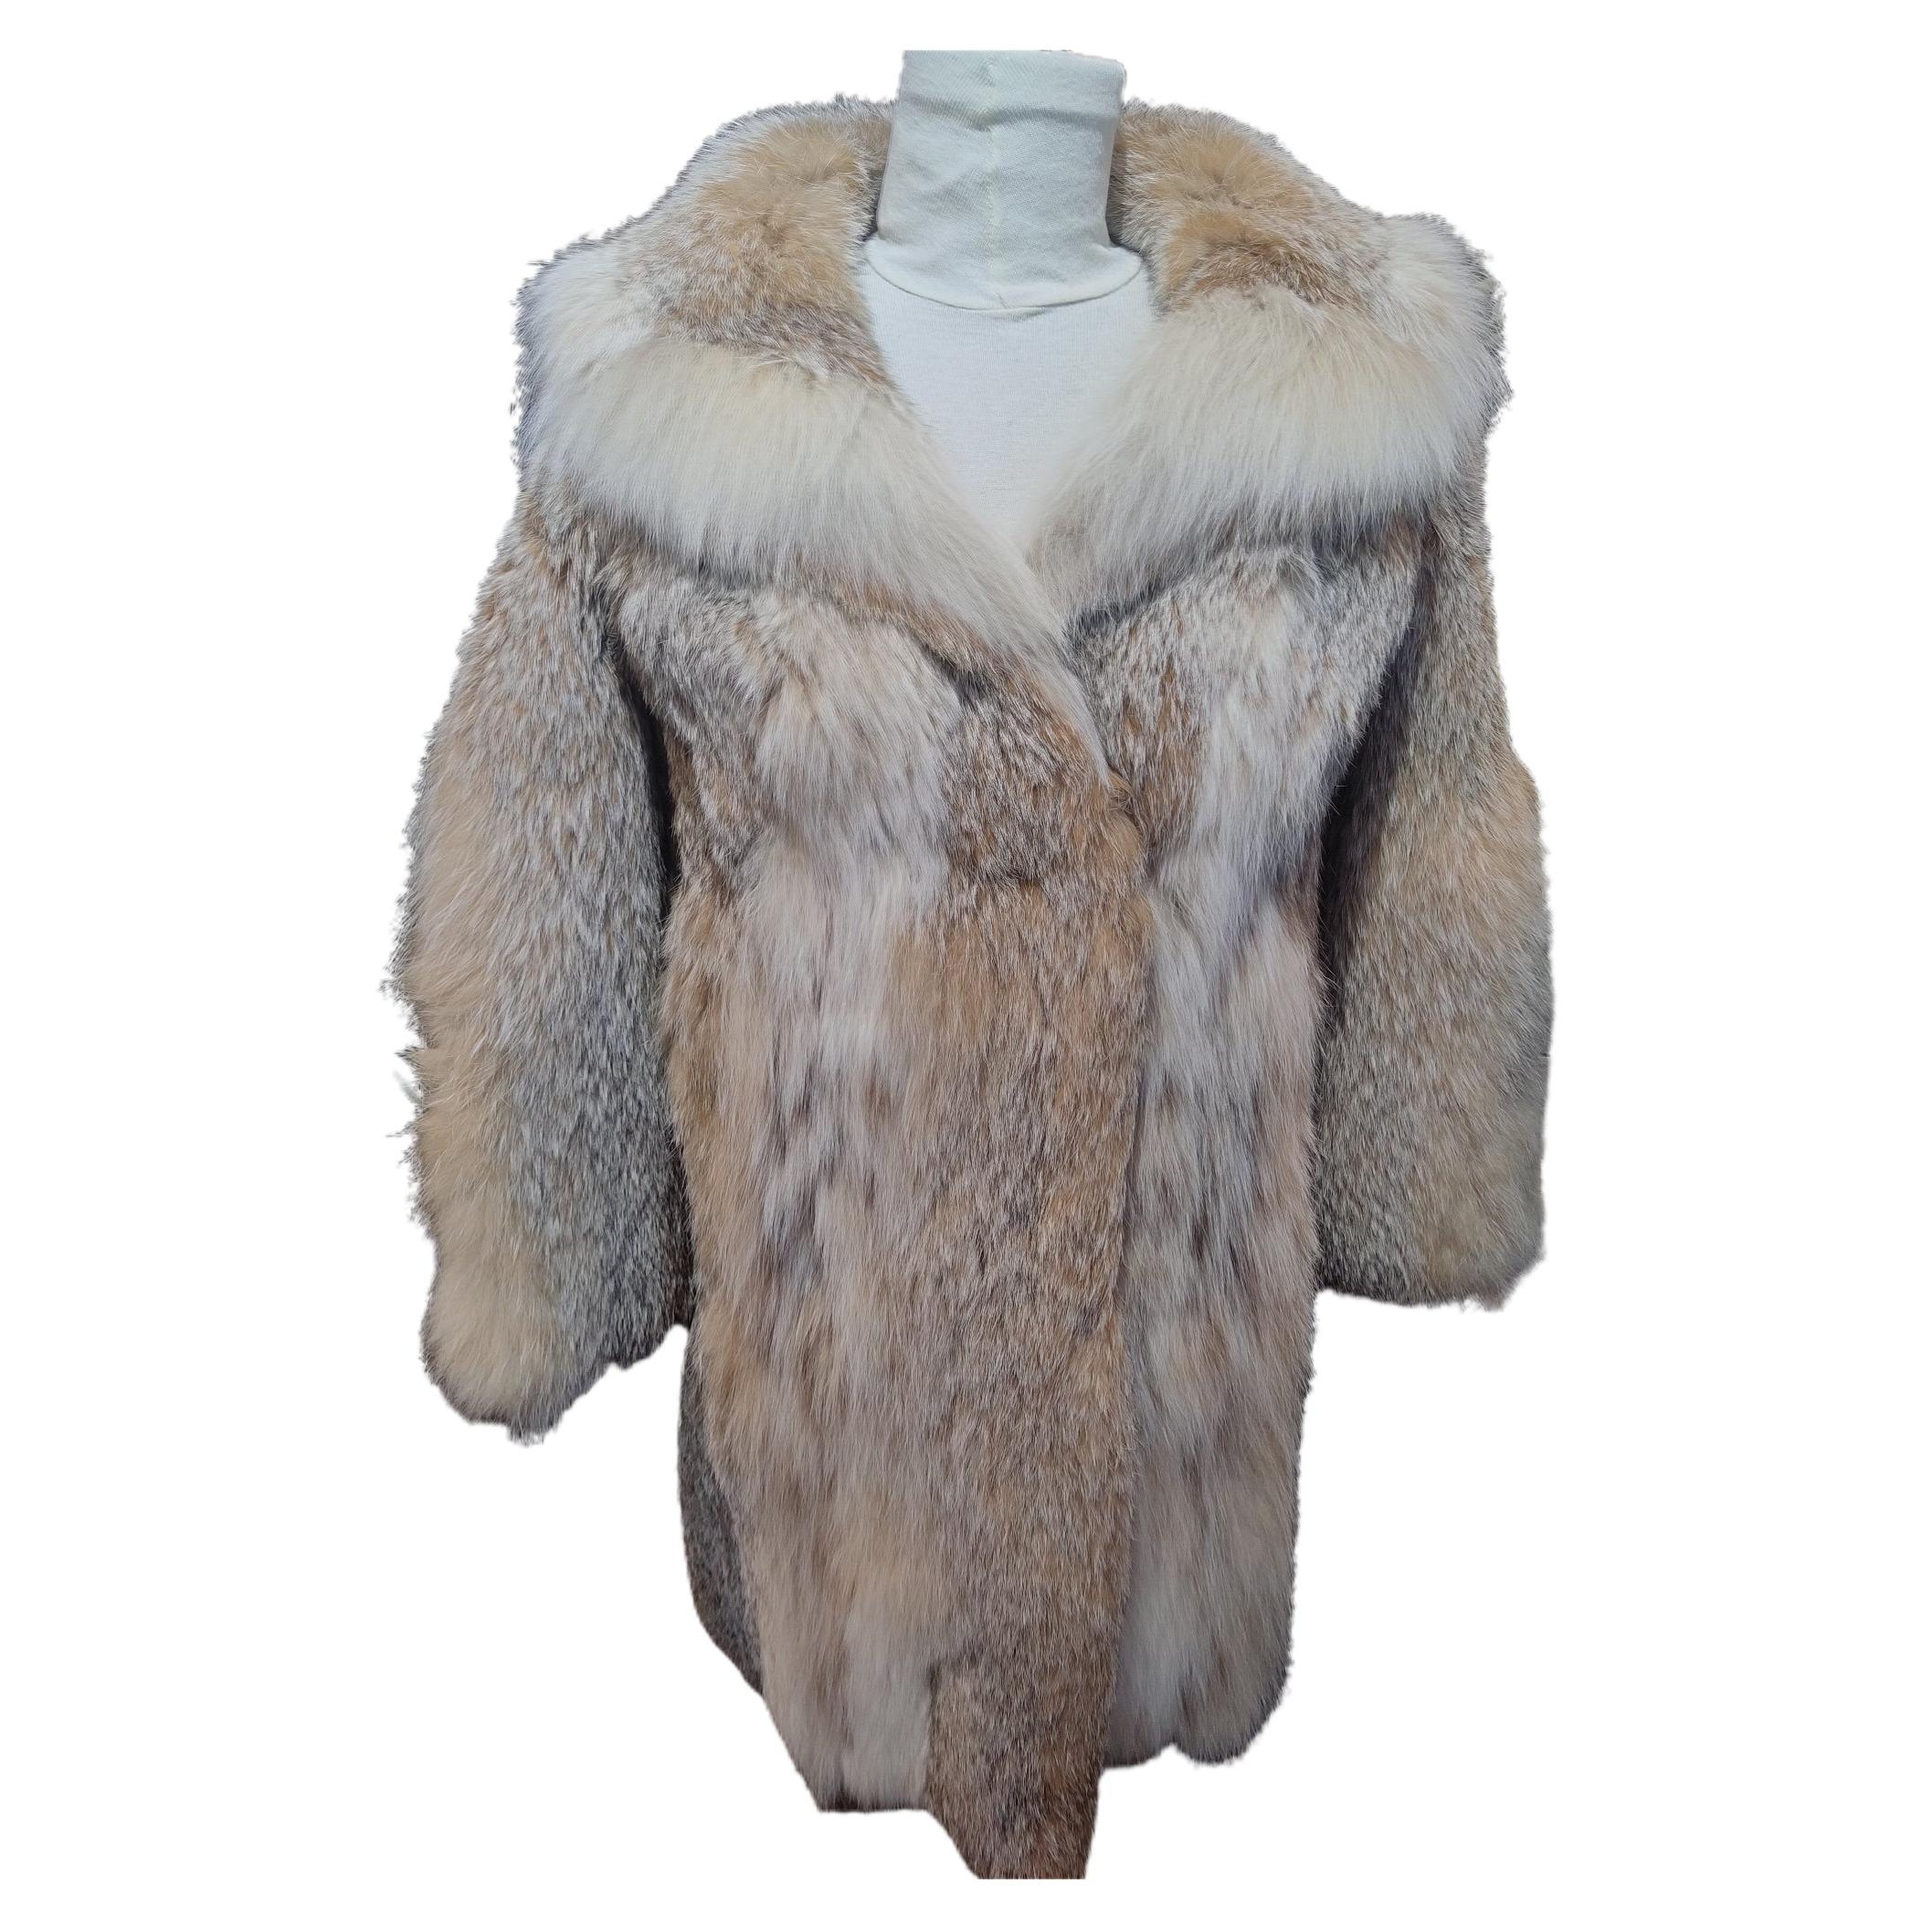 Brand new Vintage lynx fur coat size 6-8 with price tag 7999$ For Sale